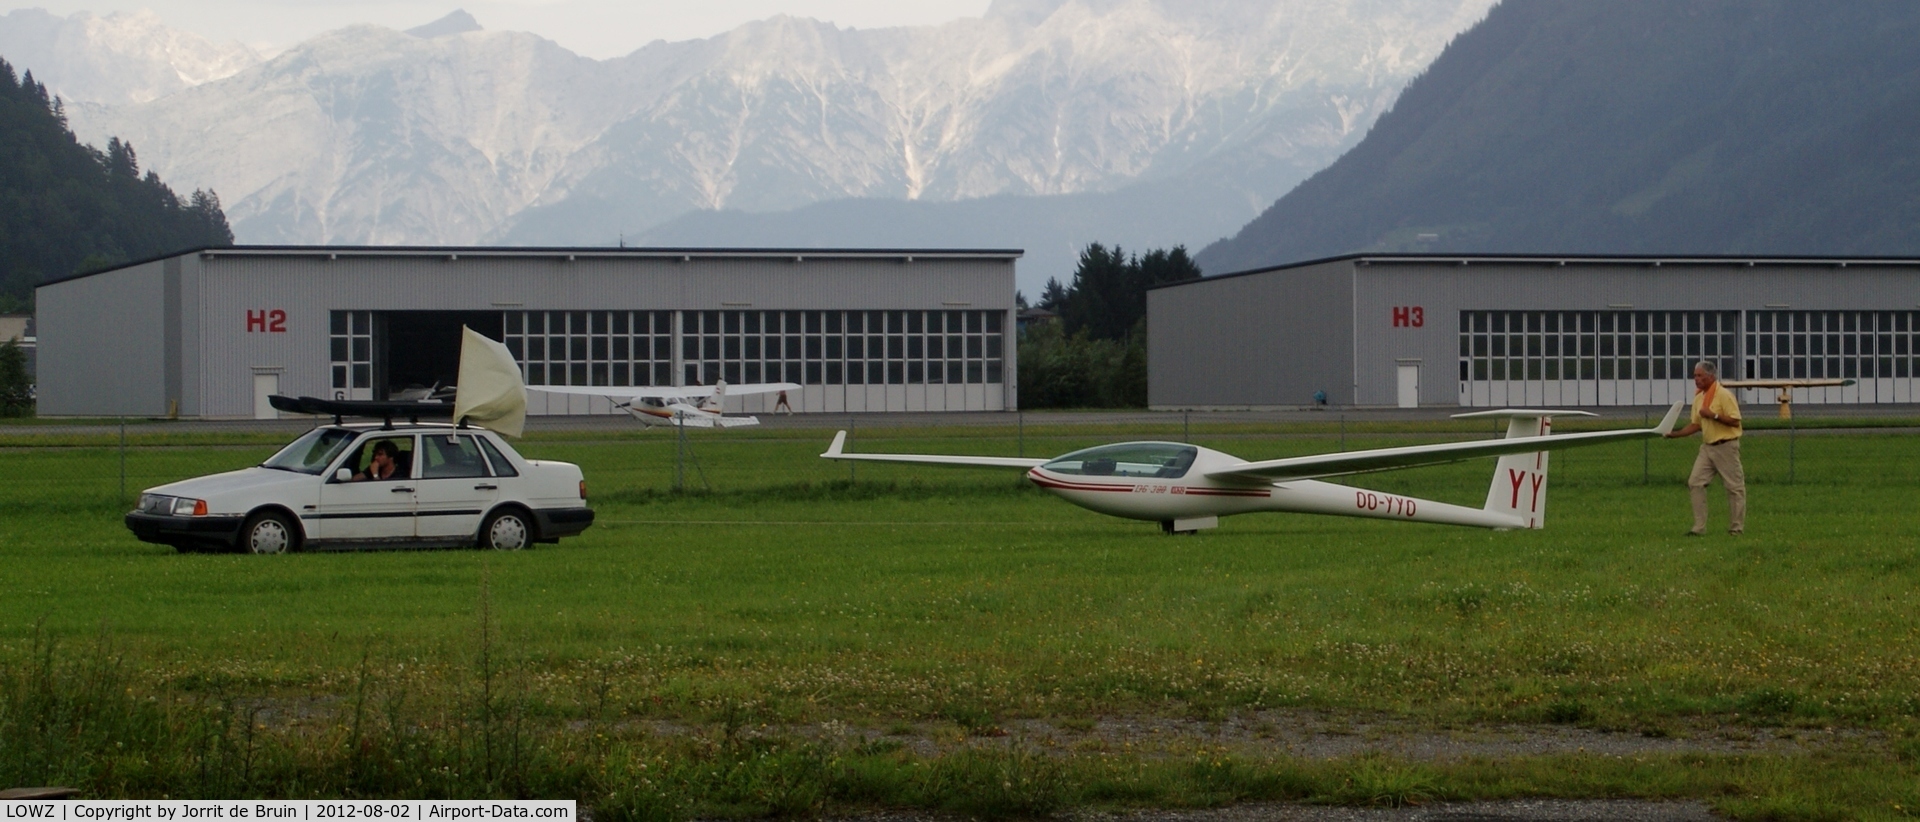 LOWZ Airport - The old and well-known Volvo car is day in, day out, crossing over the proper runway and taxiways of Zell Am See Flugplatz. But this pulling of glideplanes is also a perfect task for the car. 